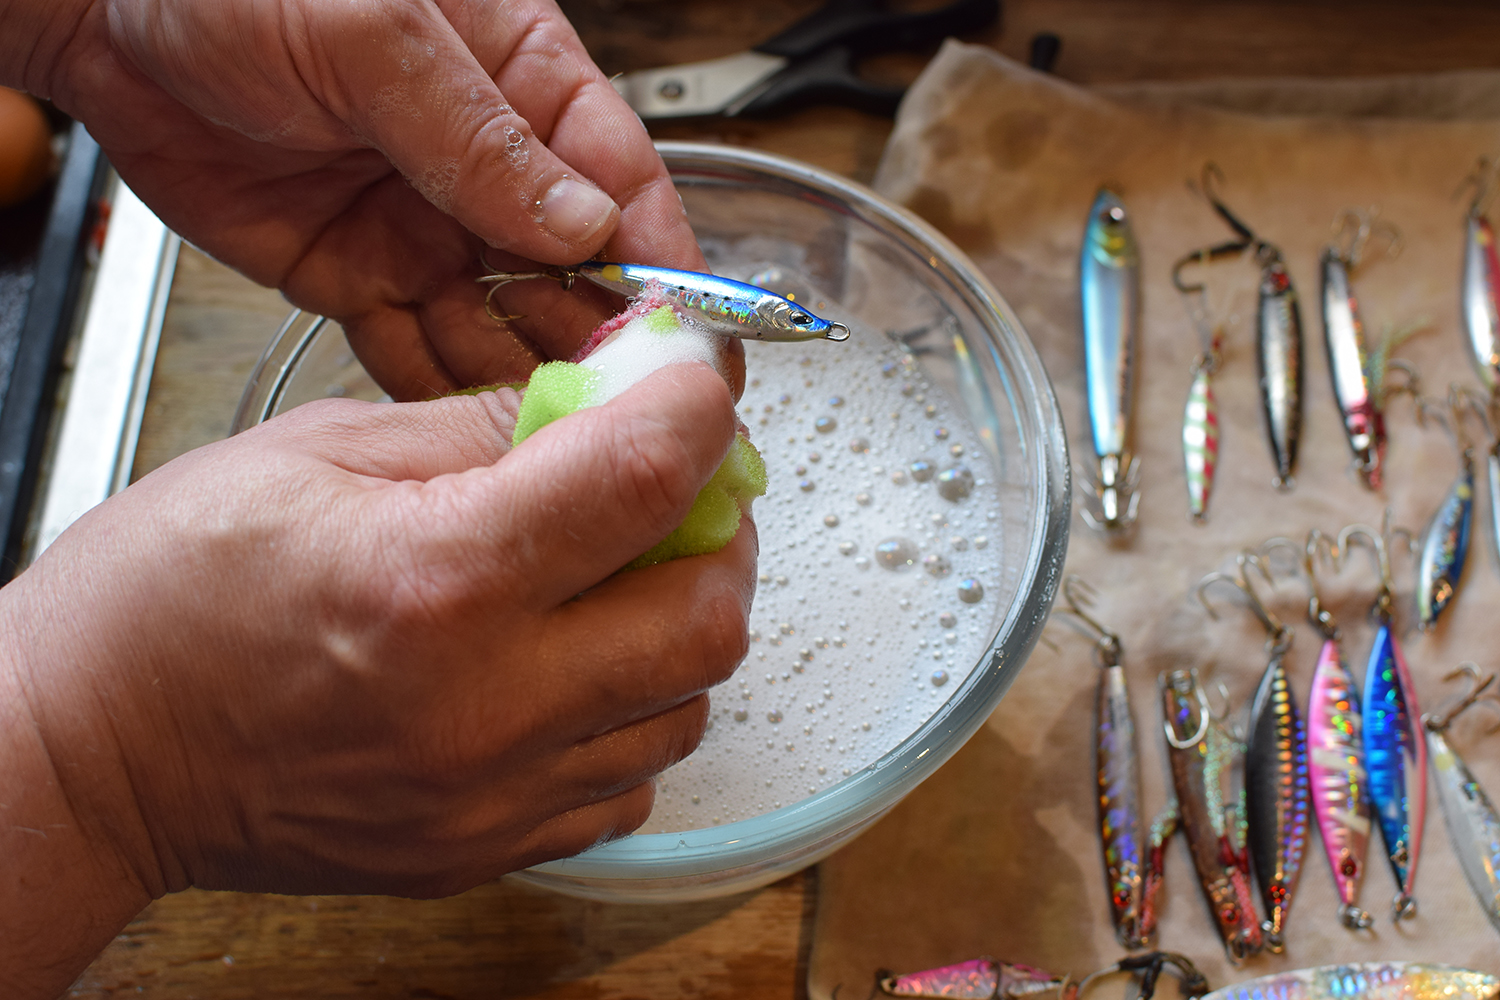 How to clean and restore old fishing lures - SeaAngler